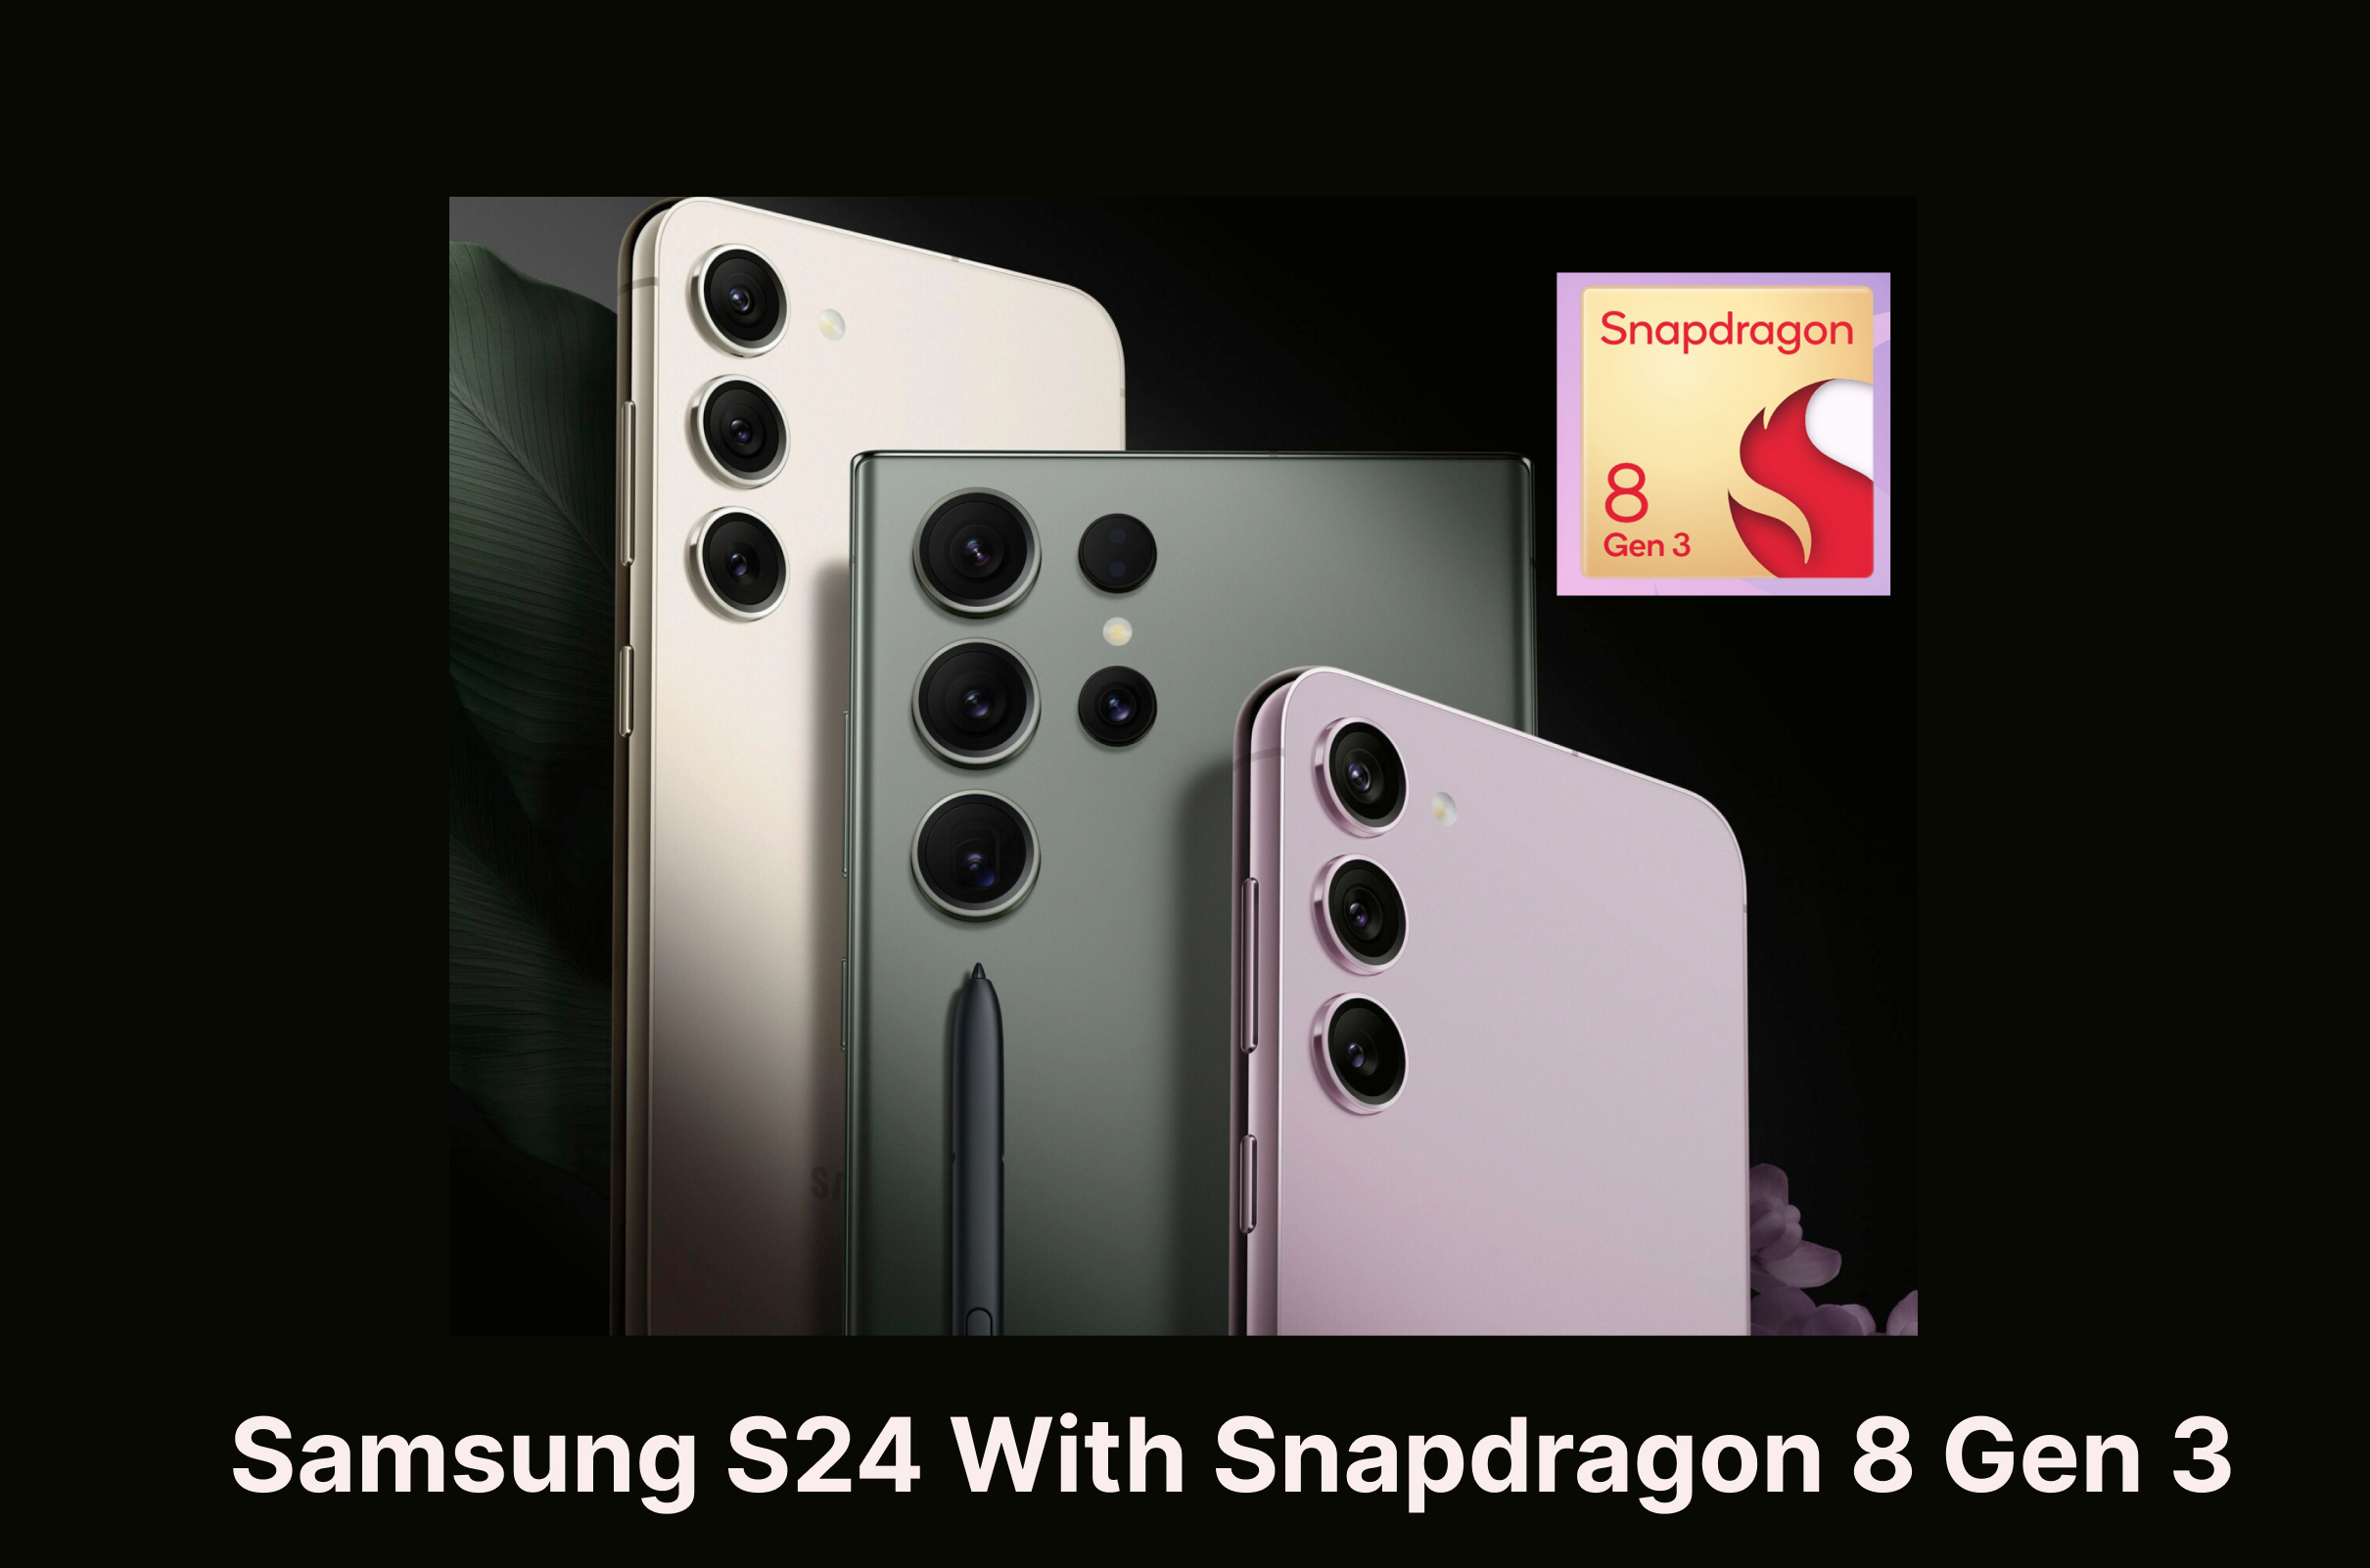 Samsung S24 Ultra and Snapdragon 8 Gen 3: What to Expect